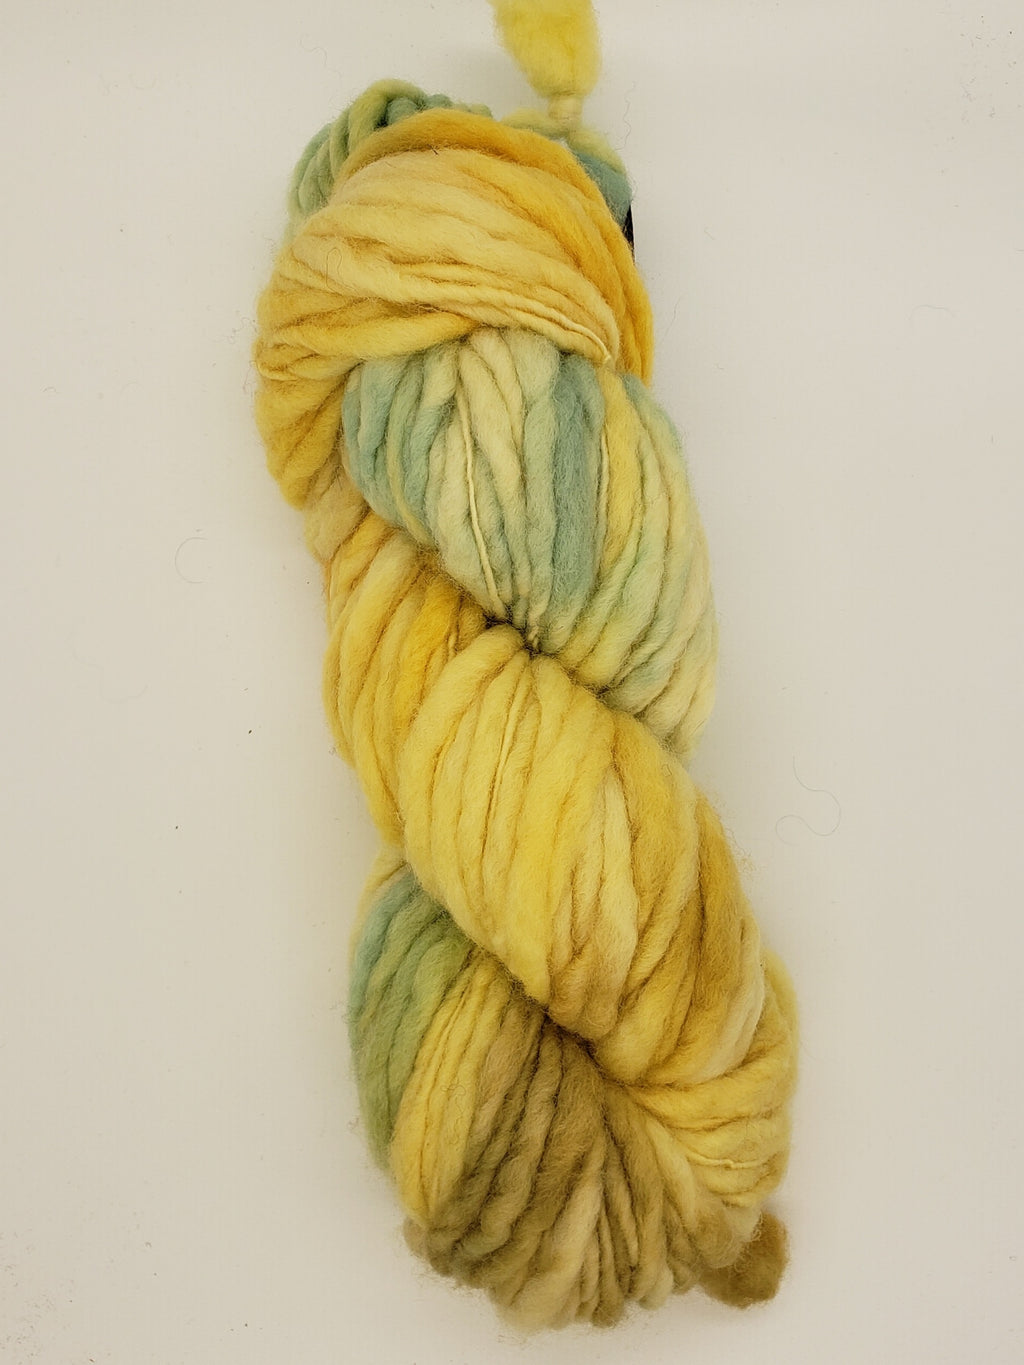 Slubby - LARCH - Merino/Blue Face Leicester - Hand Dyed Textured Yarn Thick and Thin  - Shades of Yellow and Green